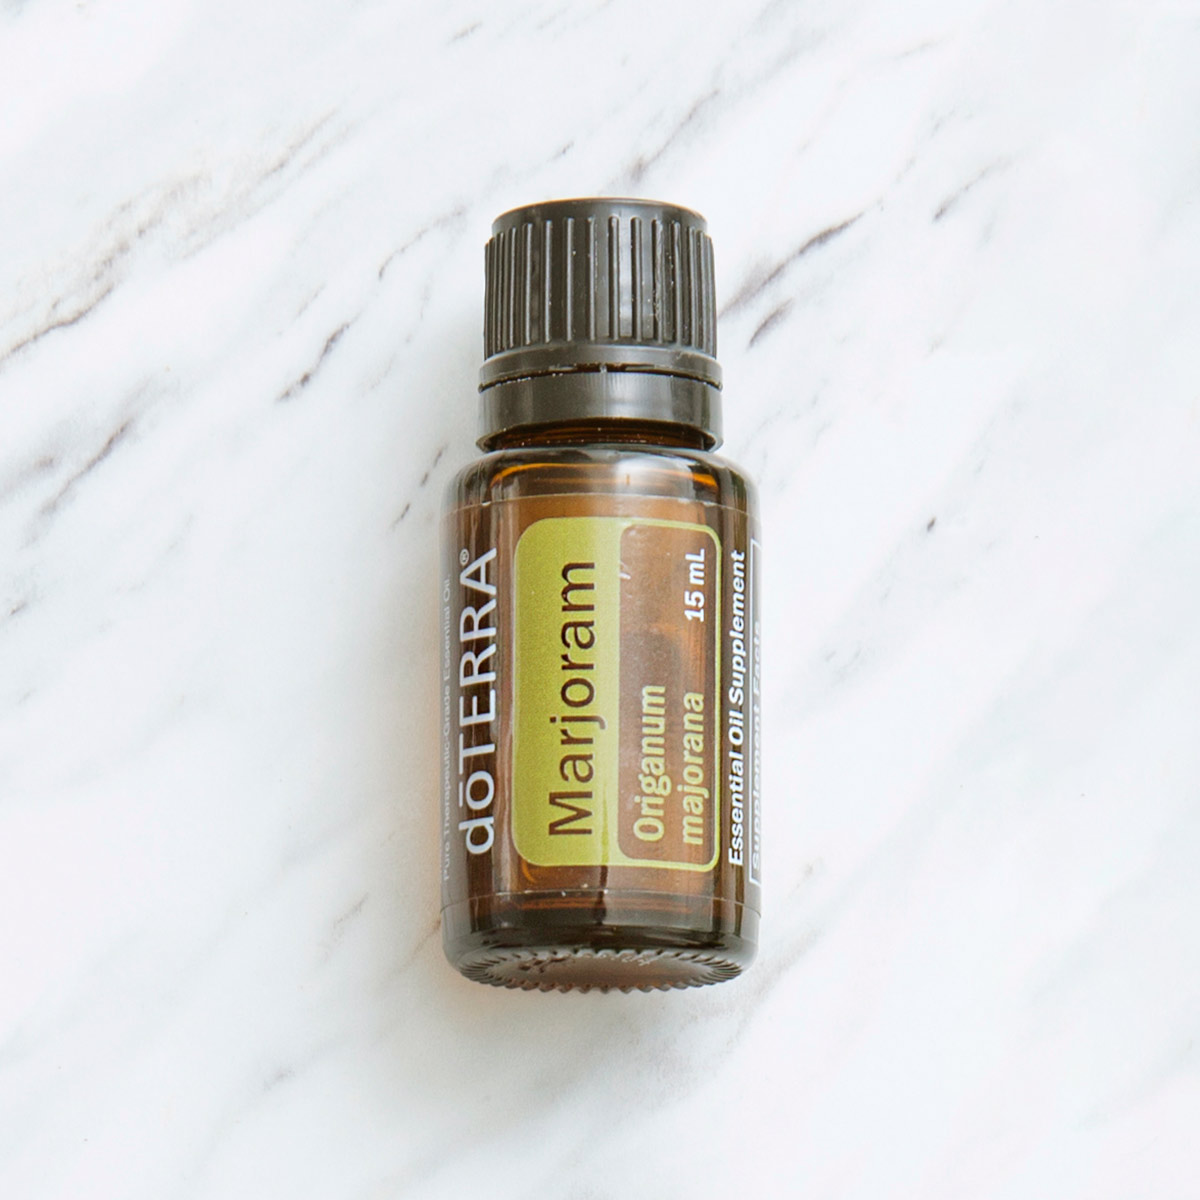 doTERRA Marjoram oil bottle on granite surface. Marjoram oil has a wide variety of benefits, including internal benefits and benefits for massage. 